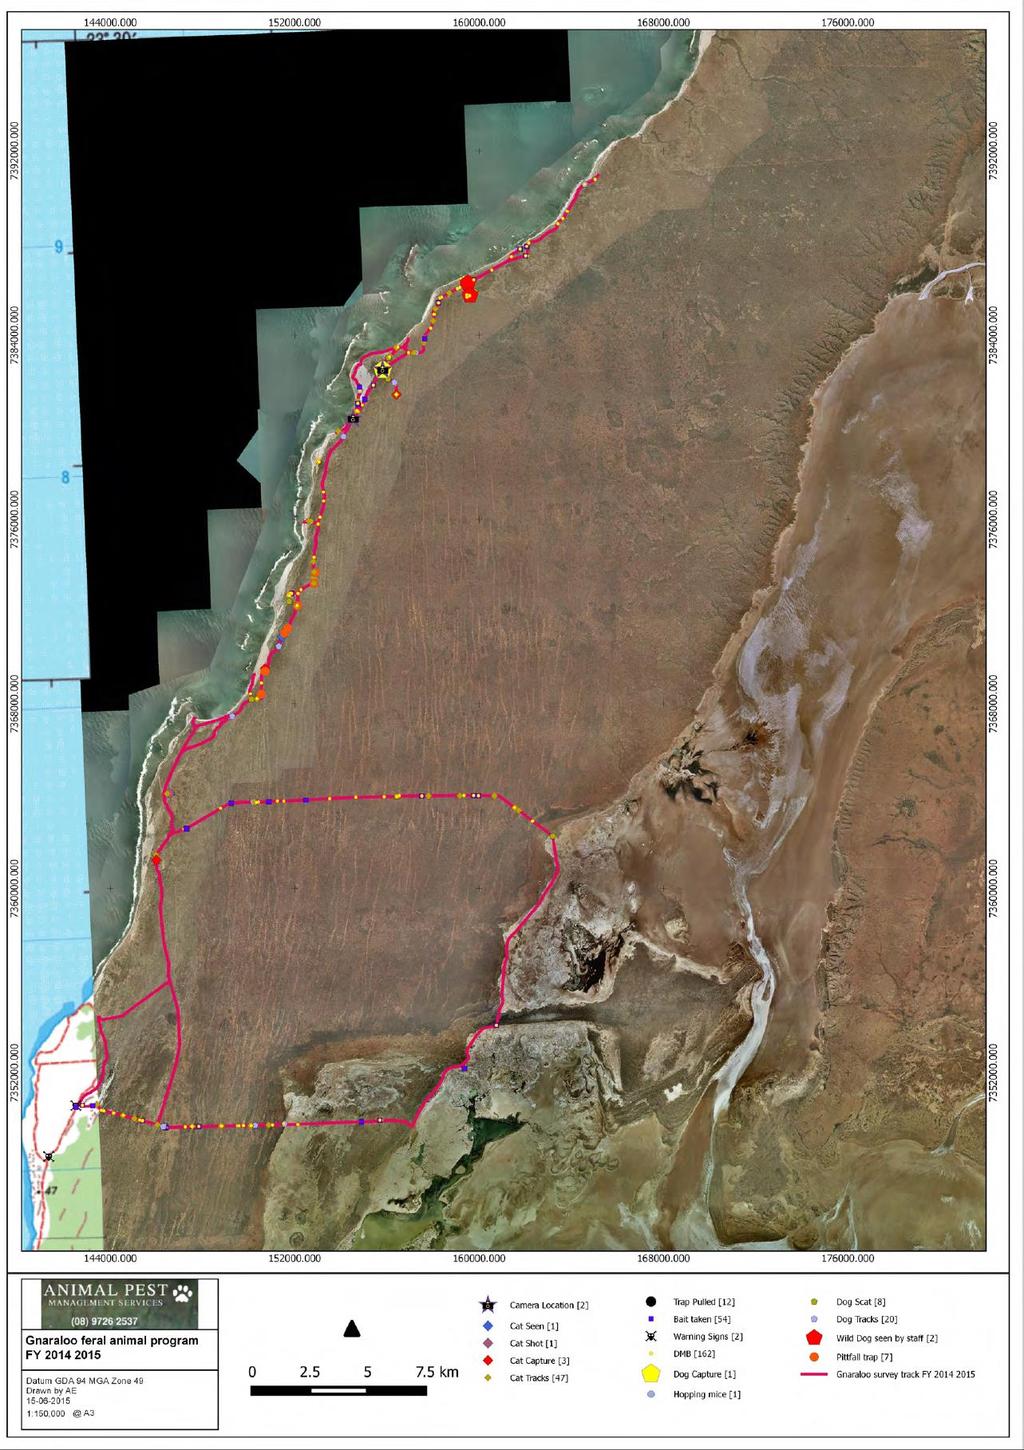 Map 5: Activities recorded by APMS on Gnaraloo during 2014/15 Map